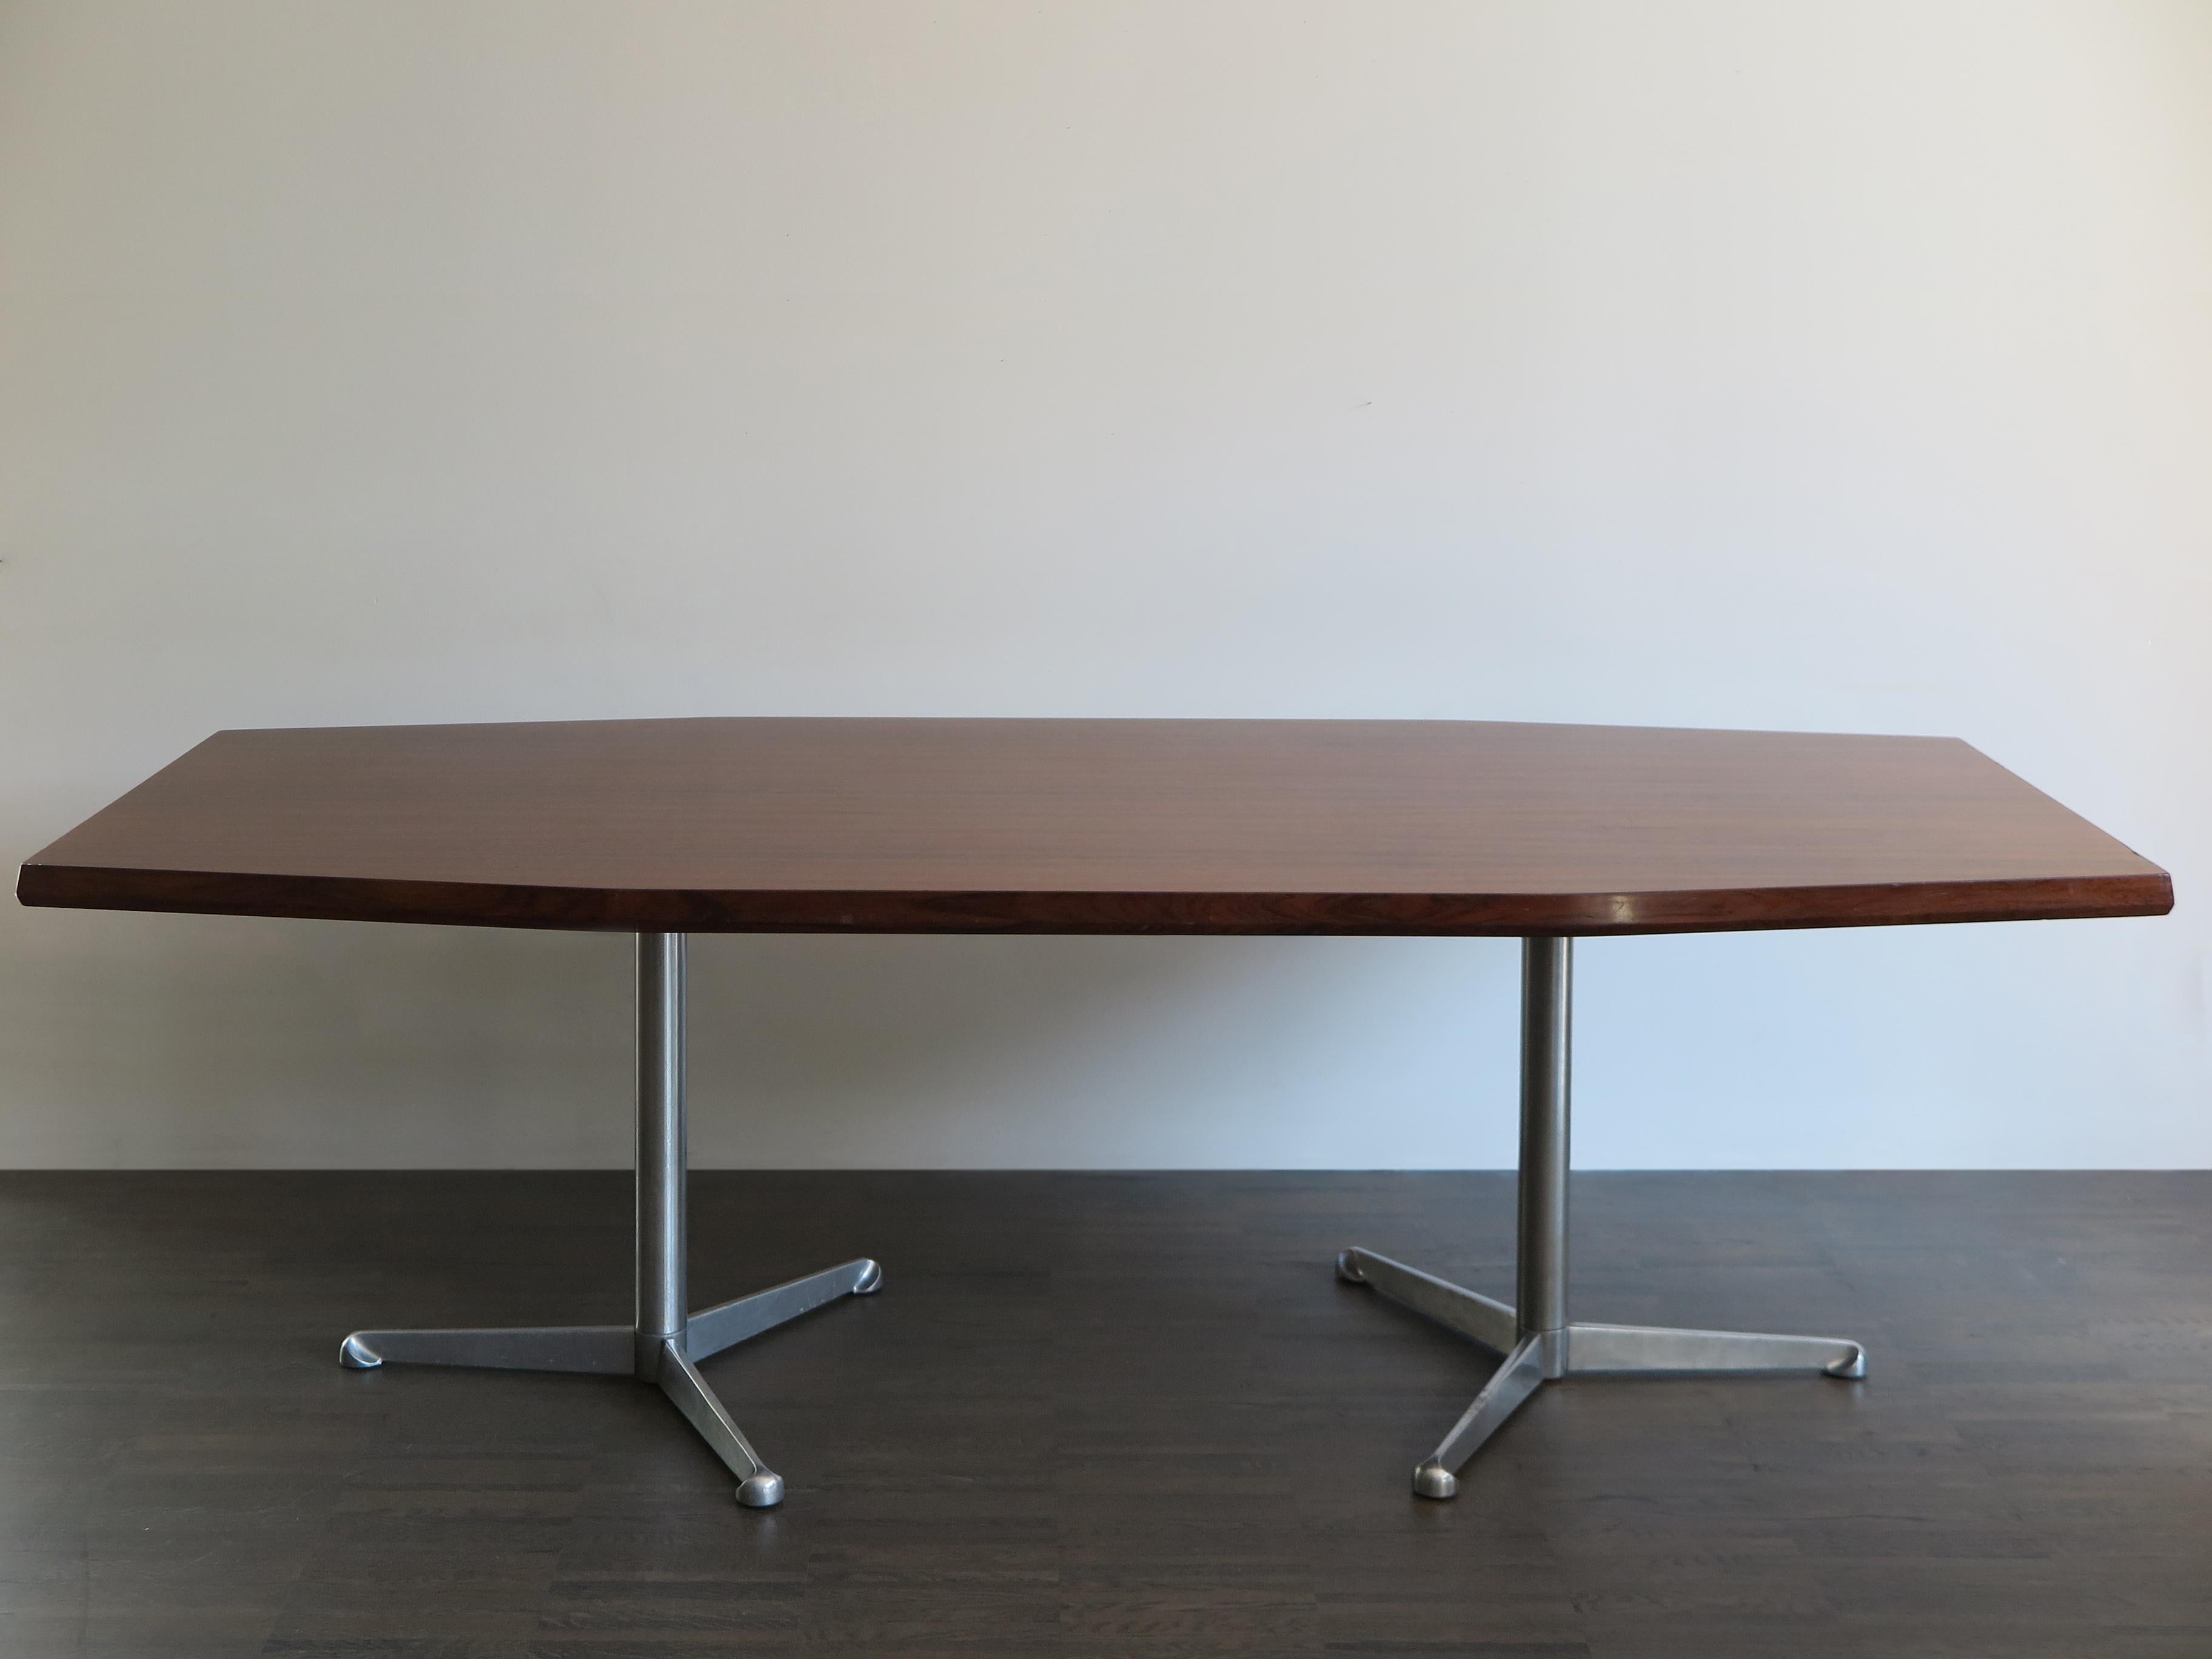 1960s Italian amazing dining table or conference table designed by famous Osvaldo Borsani for Tecno with octagonal rosewood top and metal supports, midcentury design.

Please note that the table is original of the period and thus shows normal signs